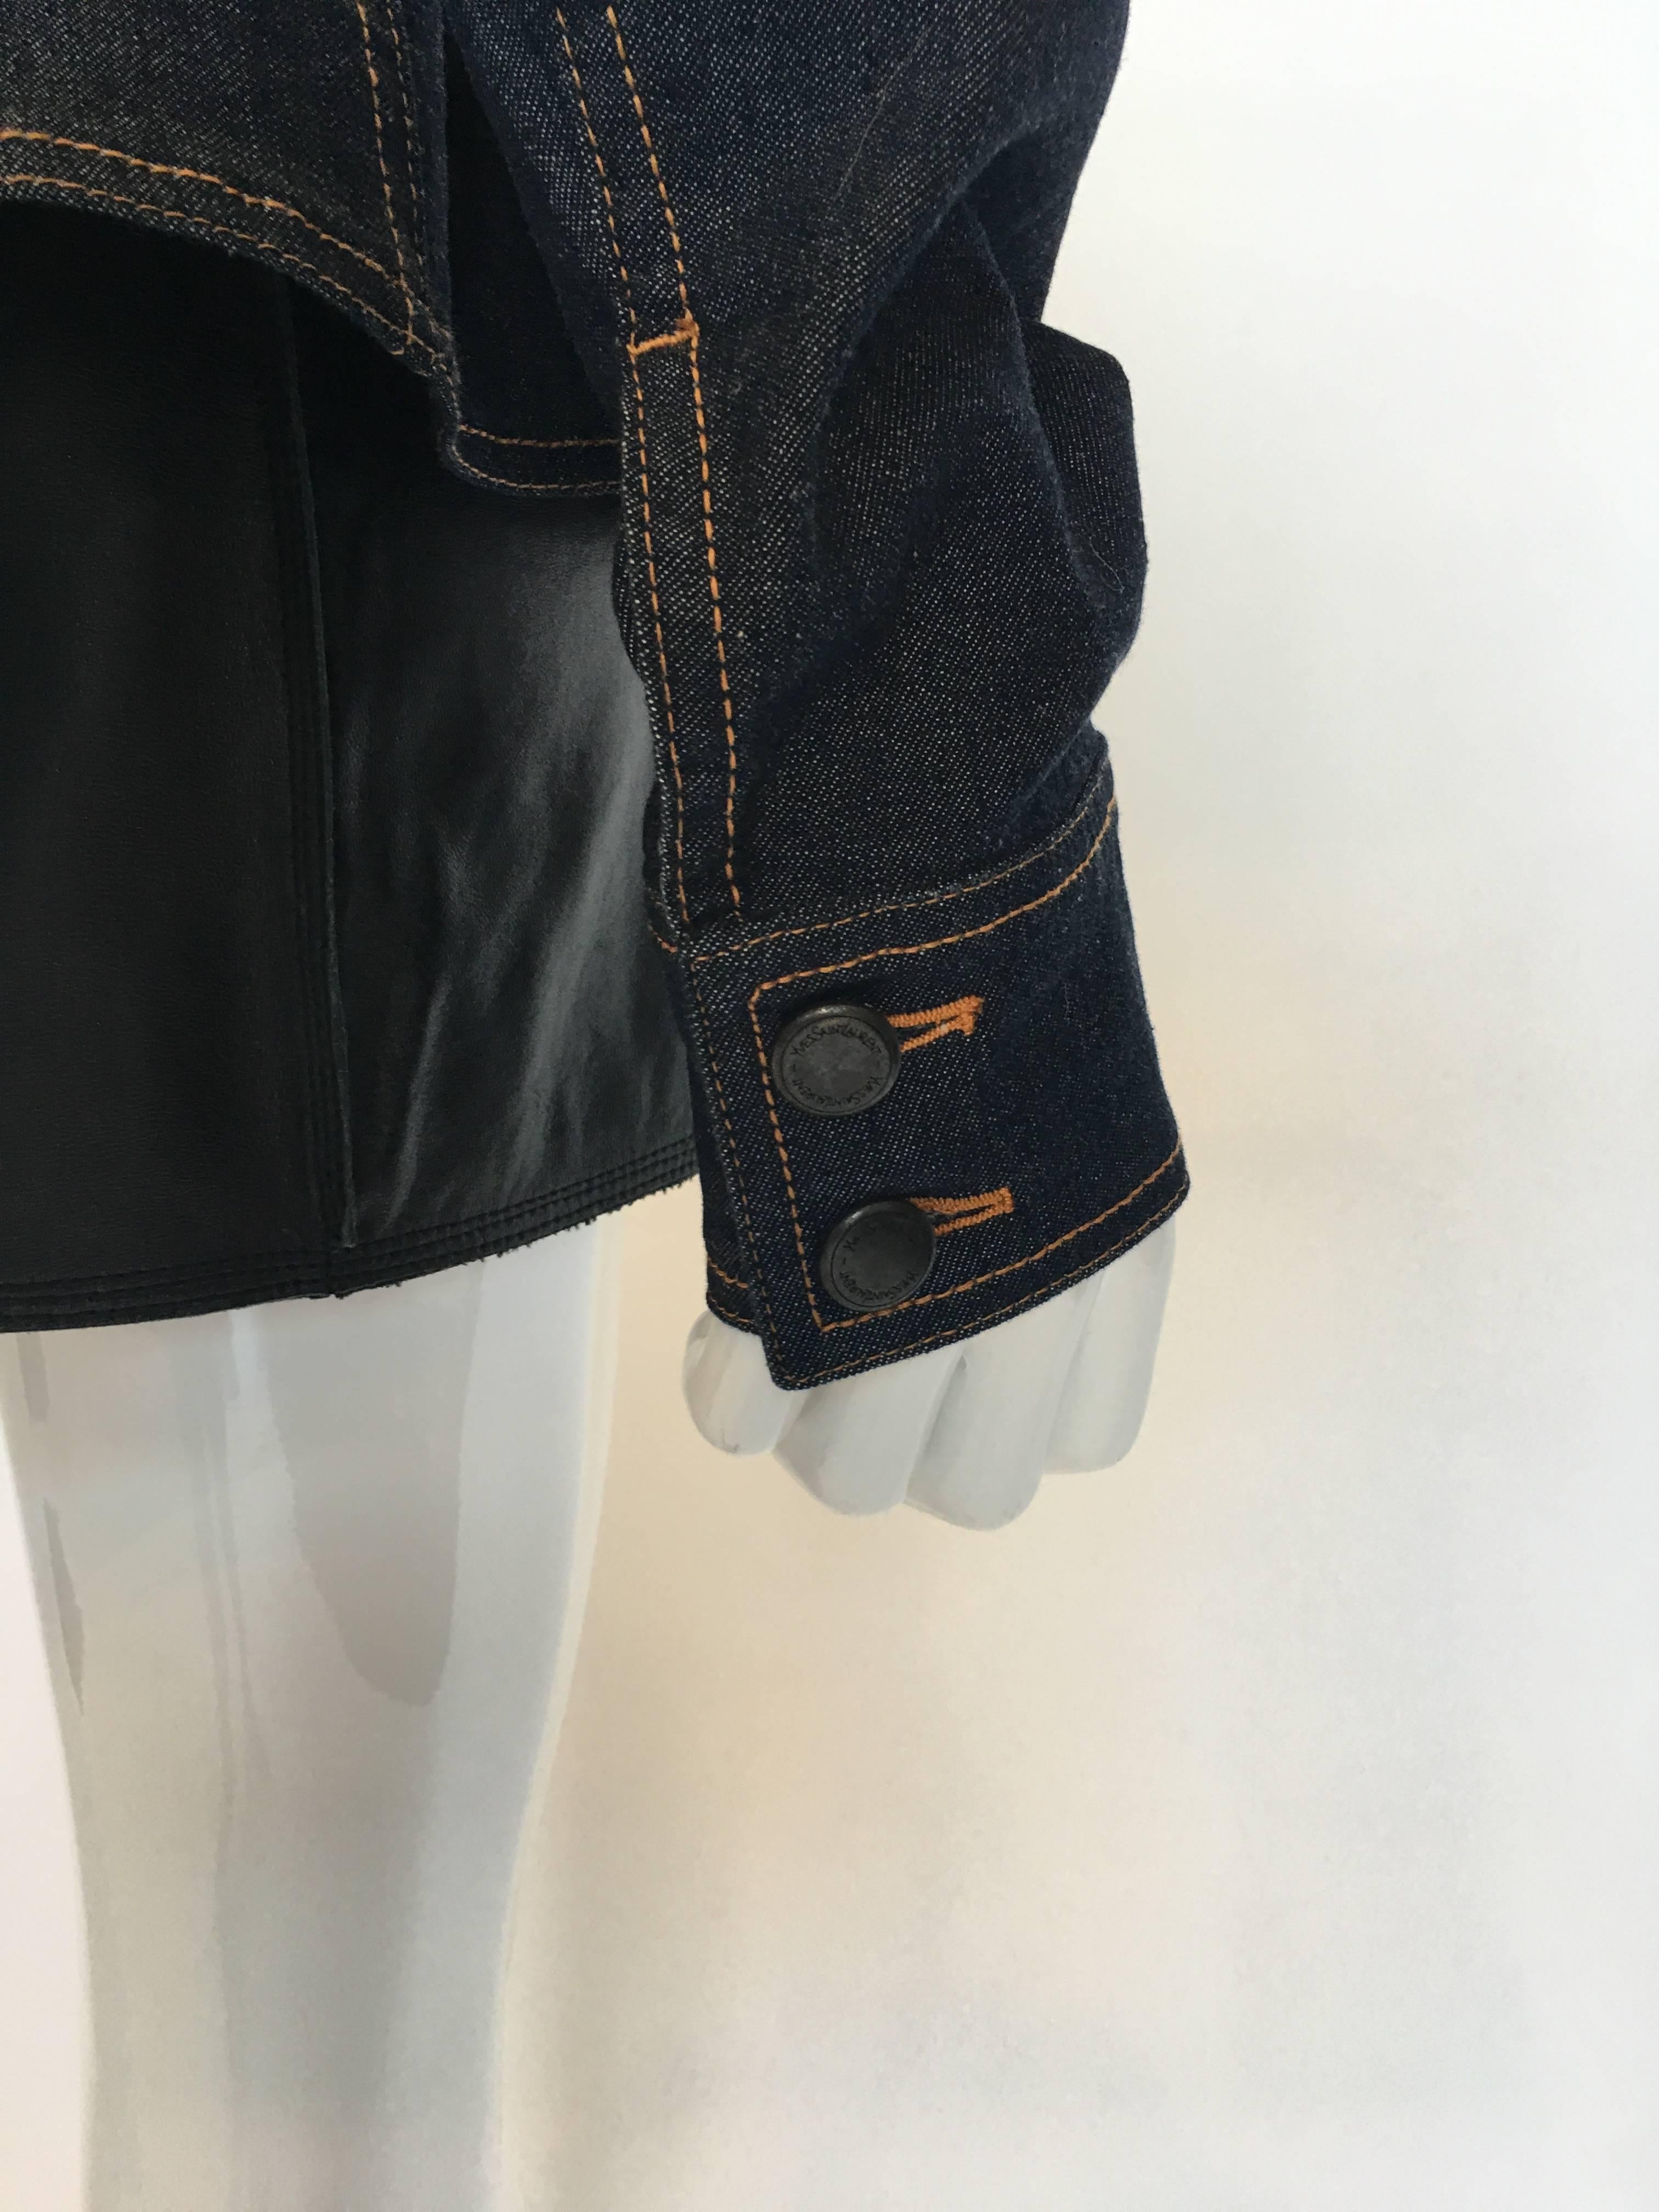 Yves Saint Laurent Denim Jacket, 1990s   In Good Condition For Sale In Los Angeles, CA